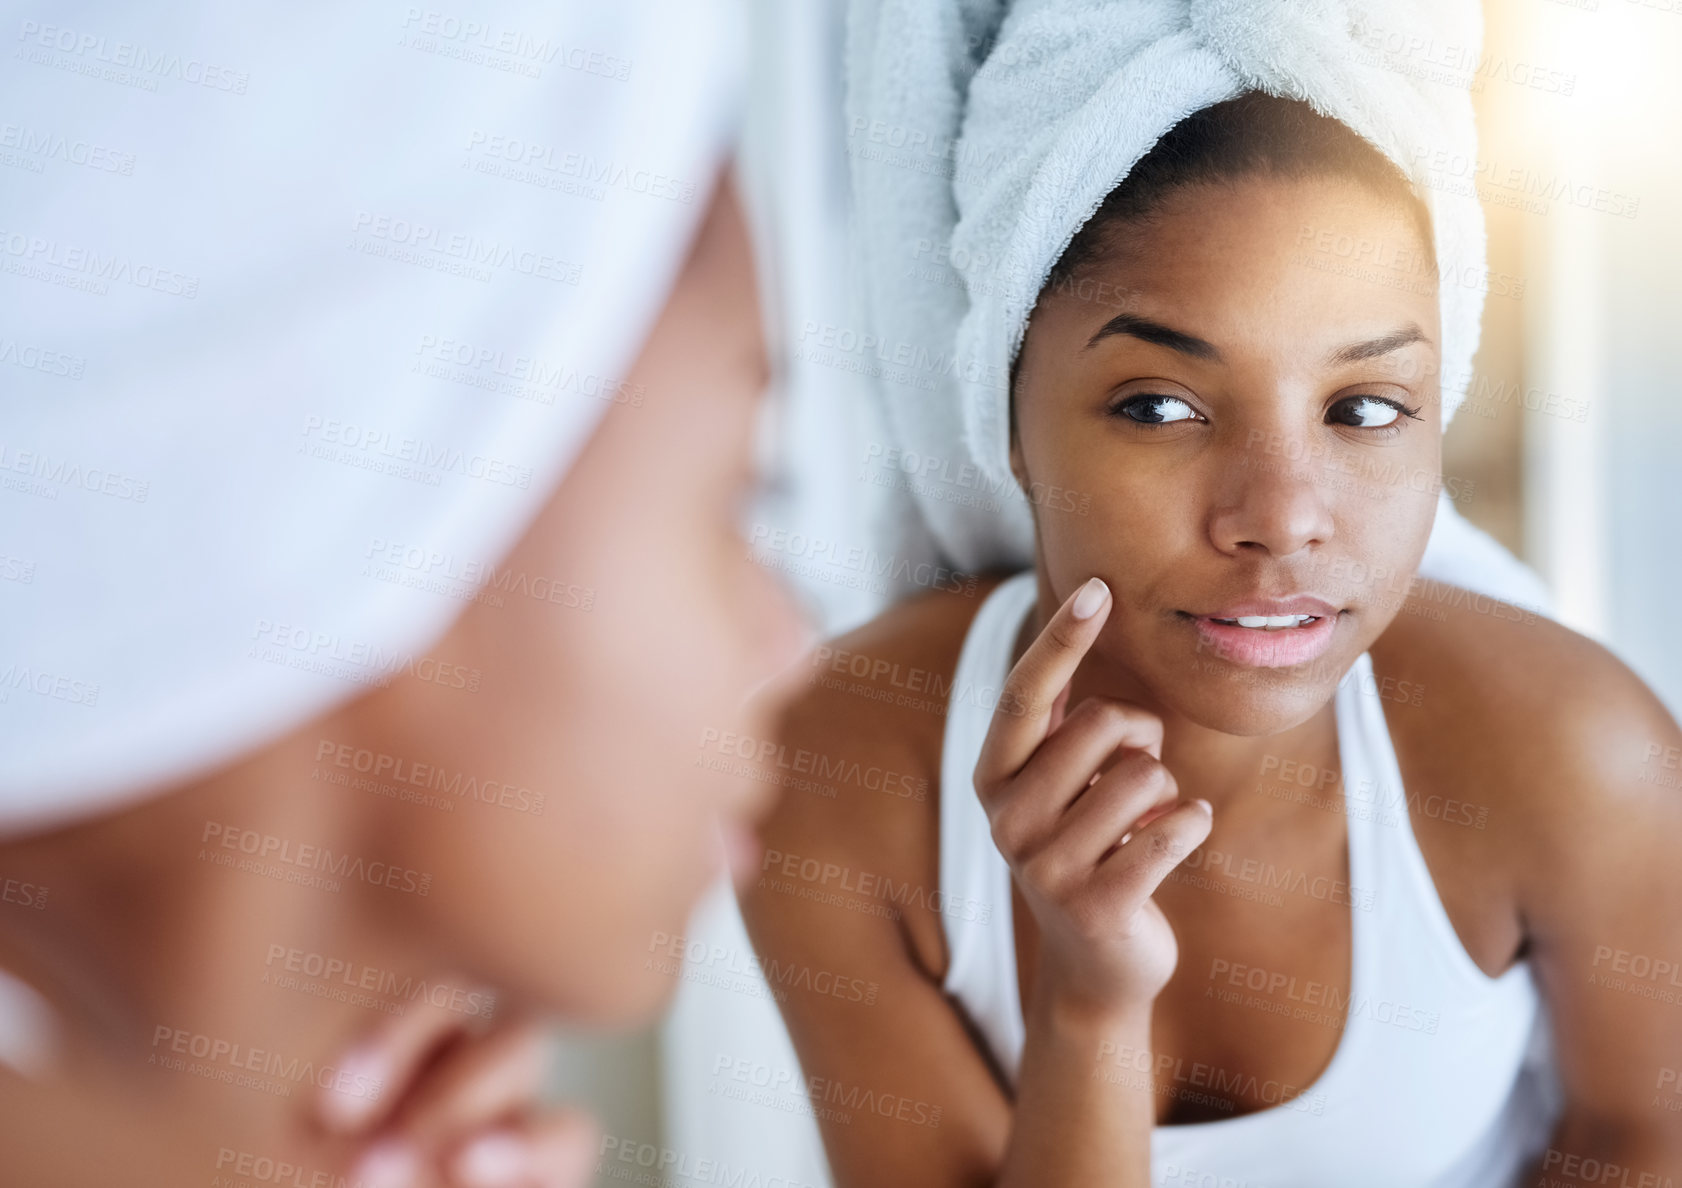 Buy stock photo Shot of a young woman inspecting her skin in front of the bathroom mirror